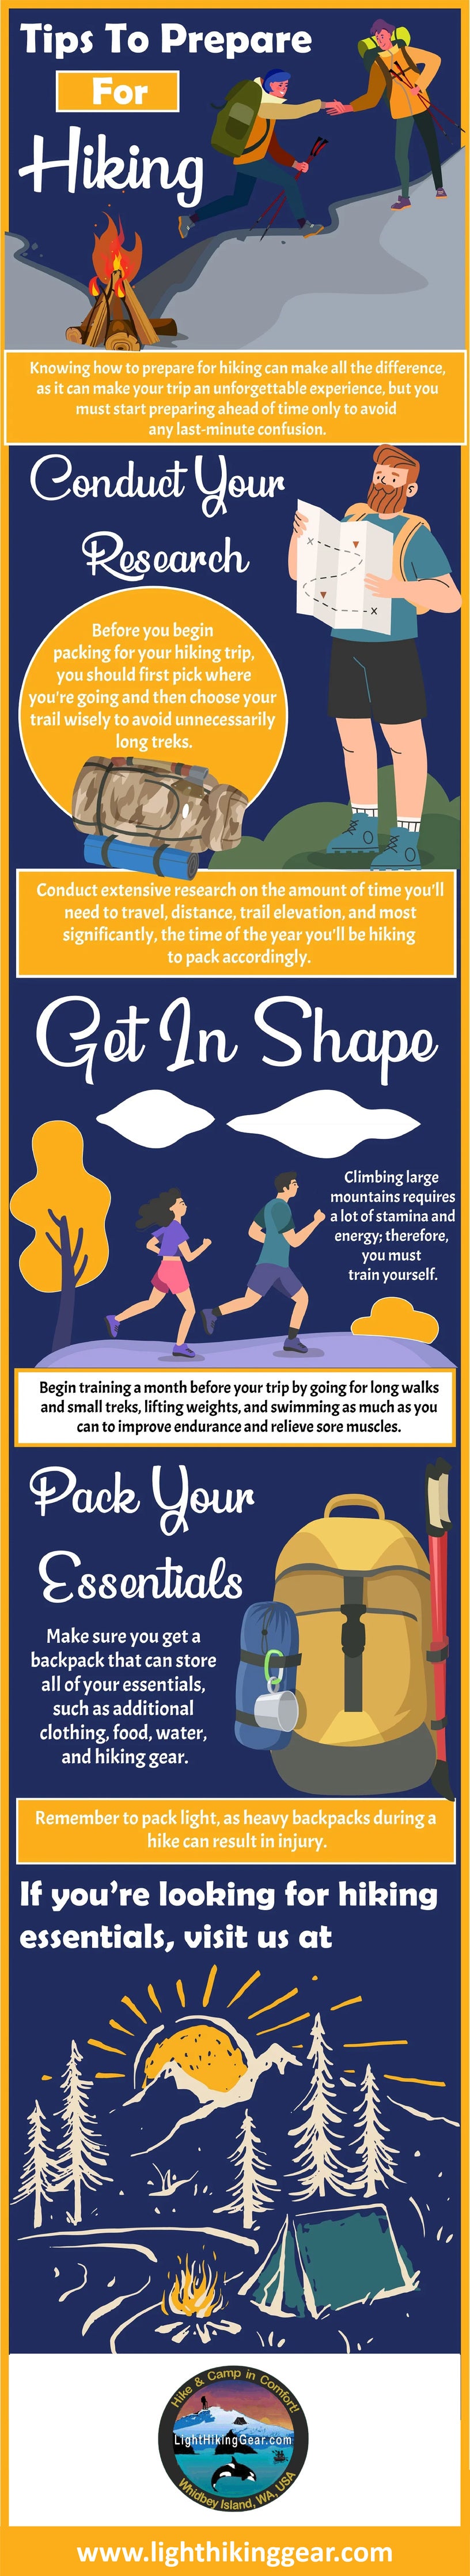 Tips To Prepare For Hiking - Infographic